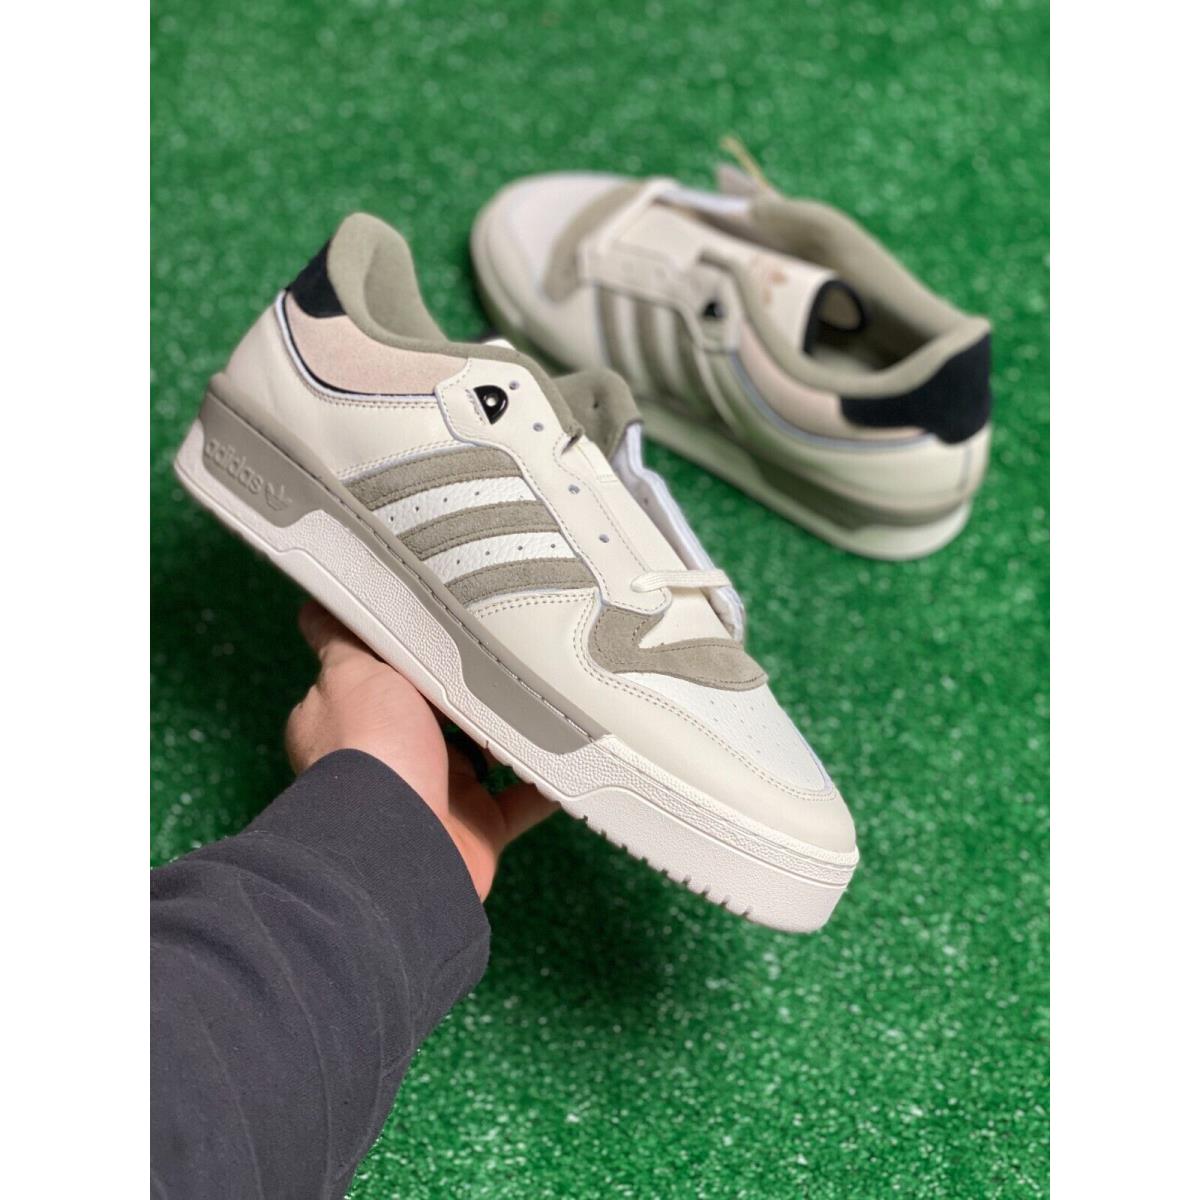 Adidas Rivalry Low 86 Mens Casual Lifestyle Shoes Beige IE7171 Sz 13 - Beige